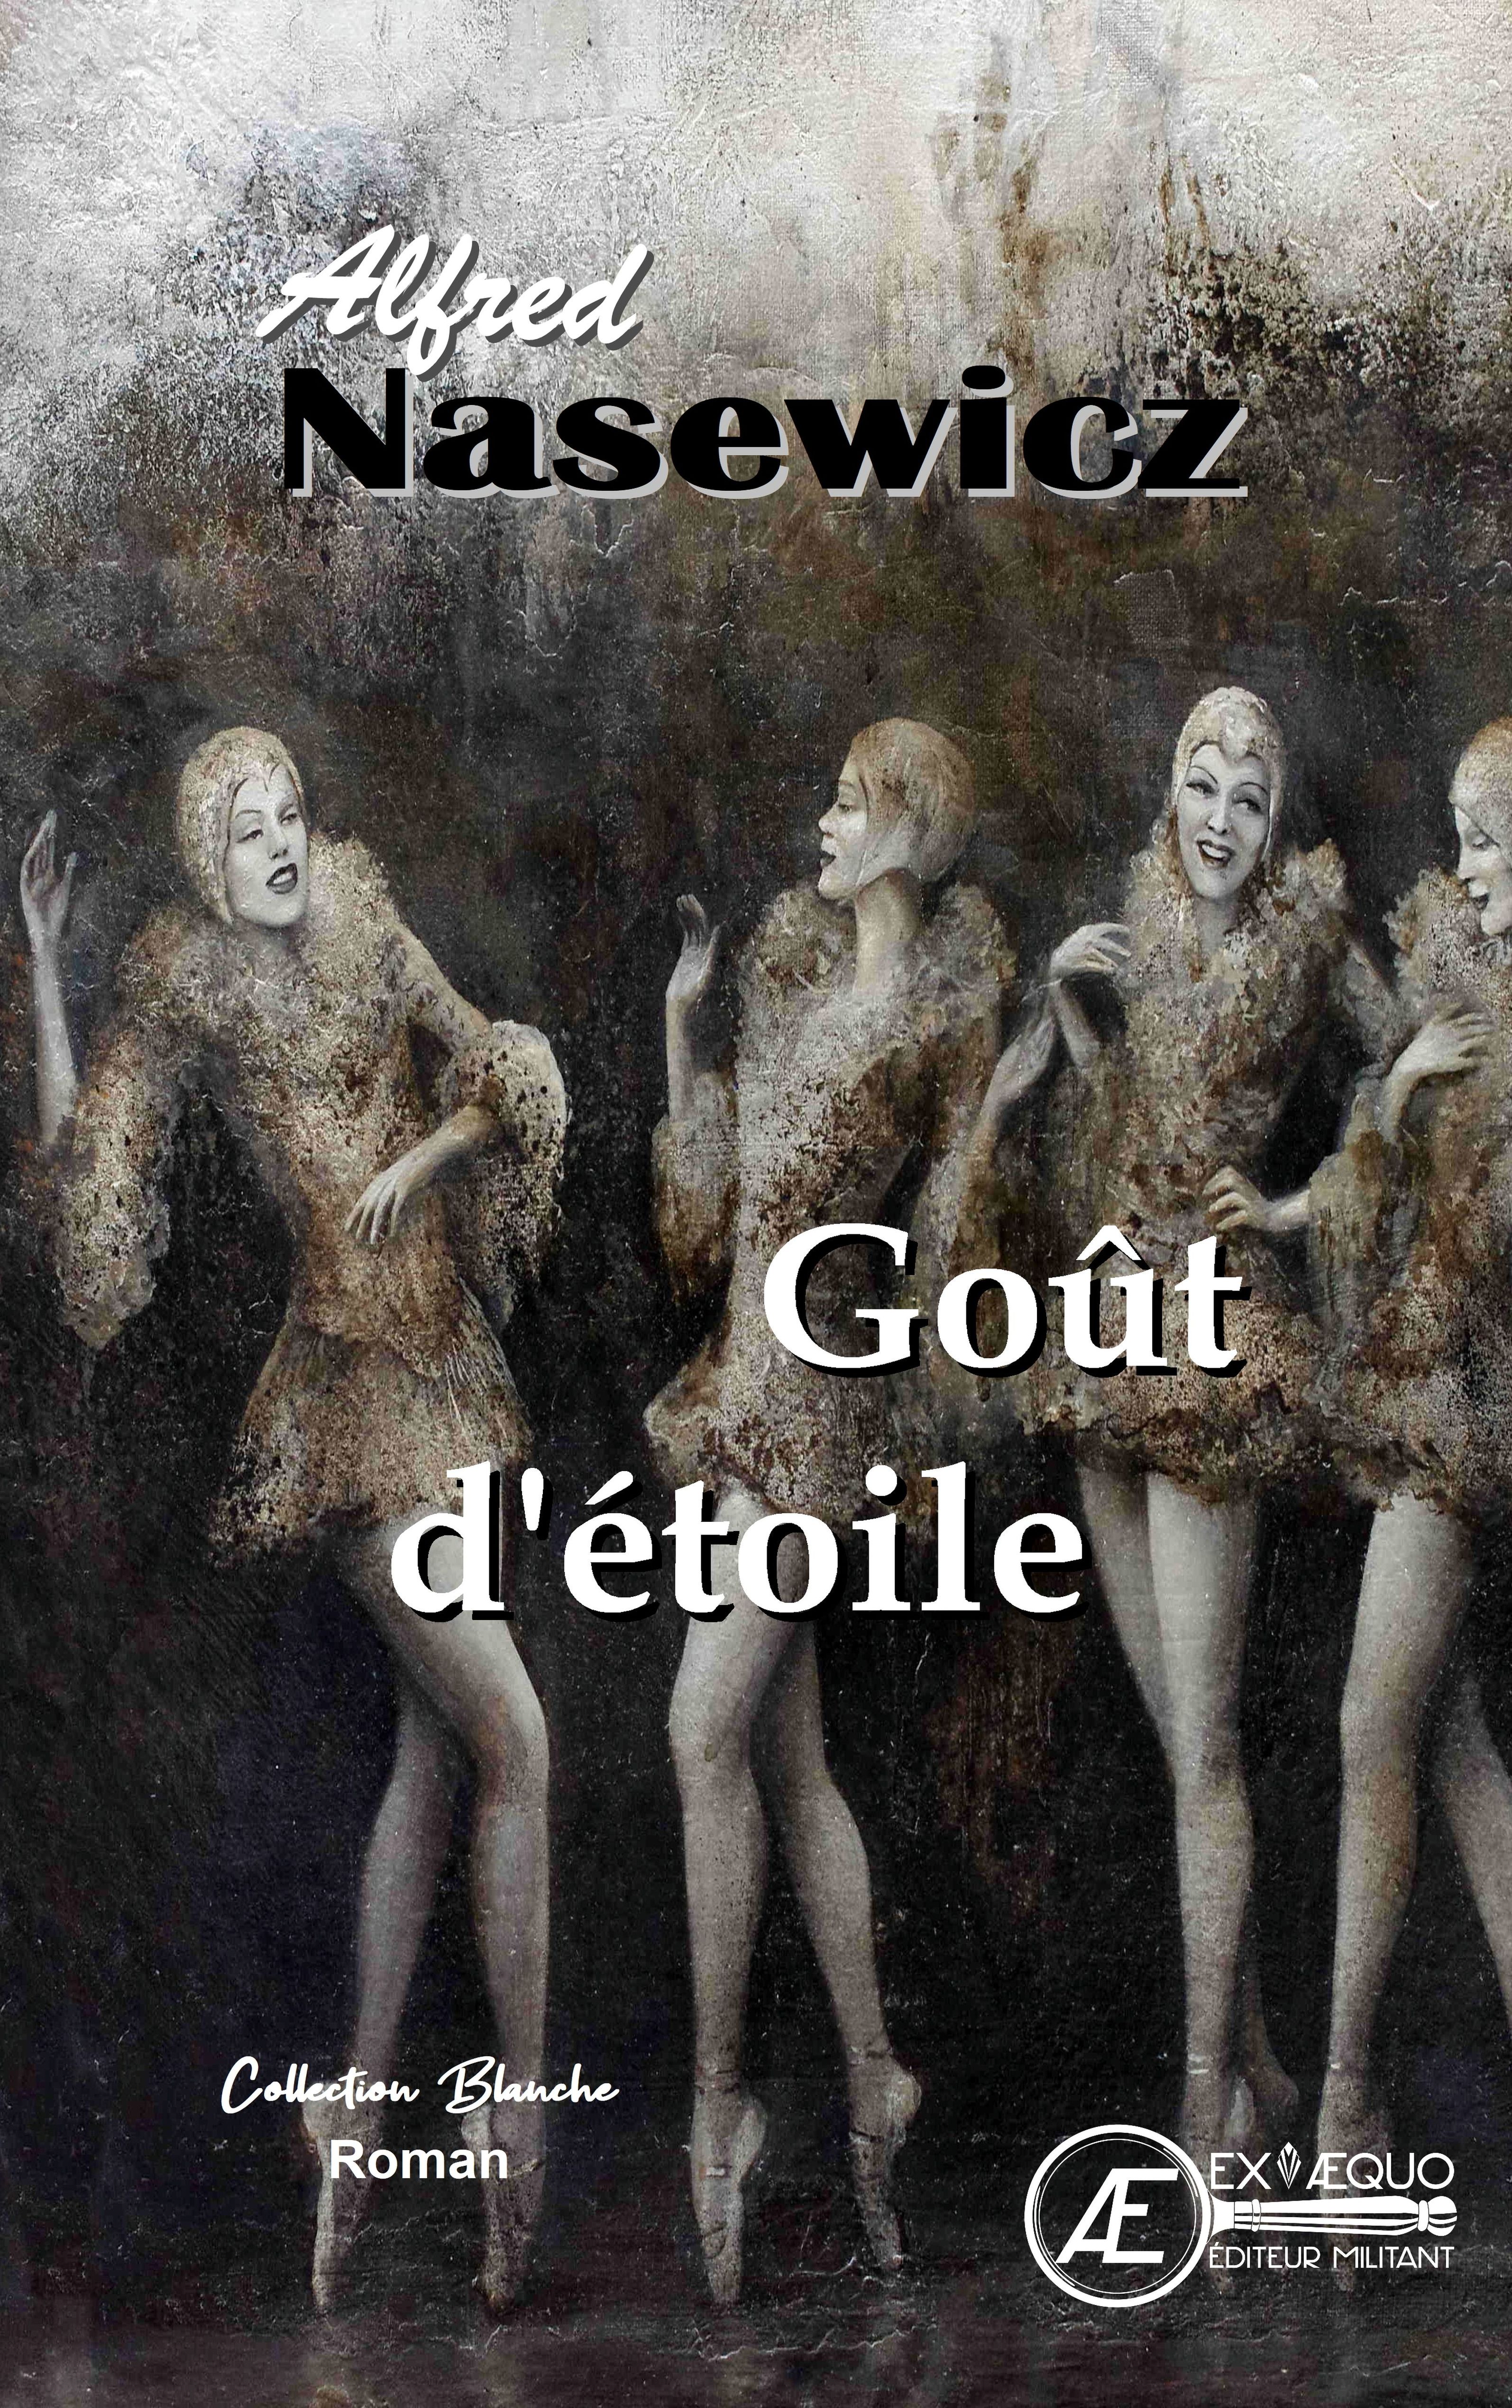 You are currently viewing Goût d’étoile, d’Alfred Nasewics